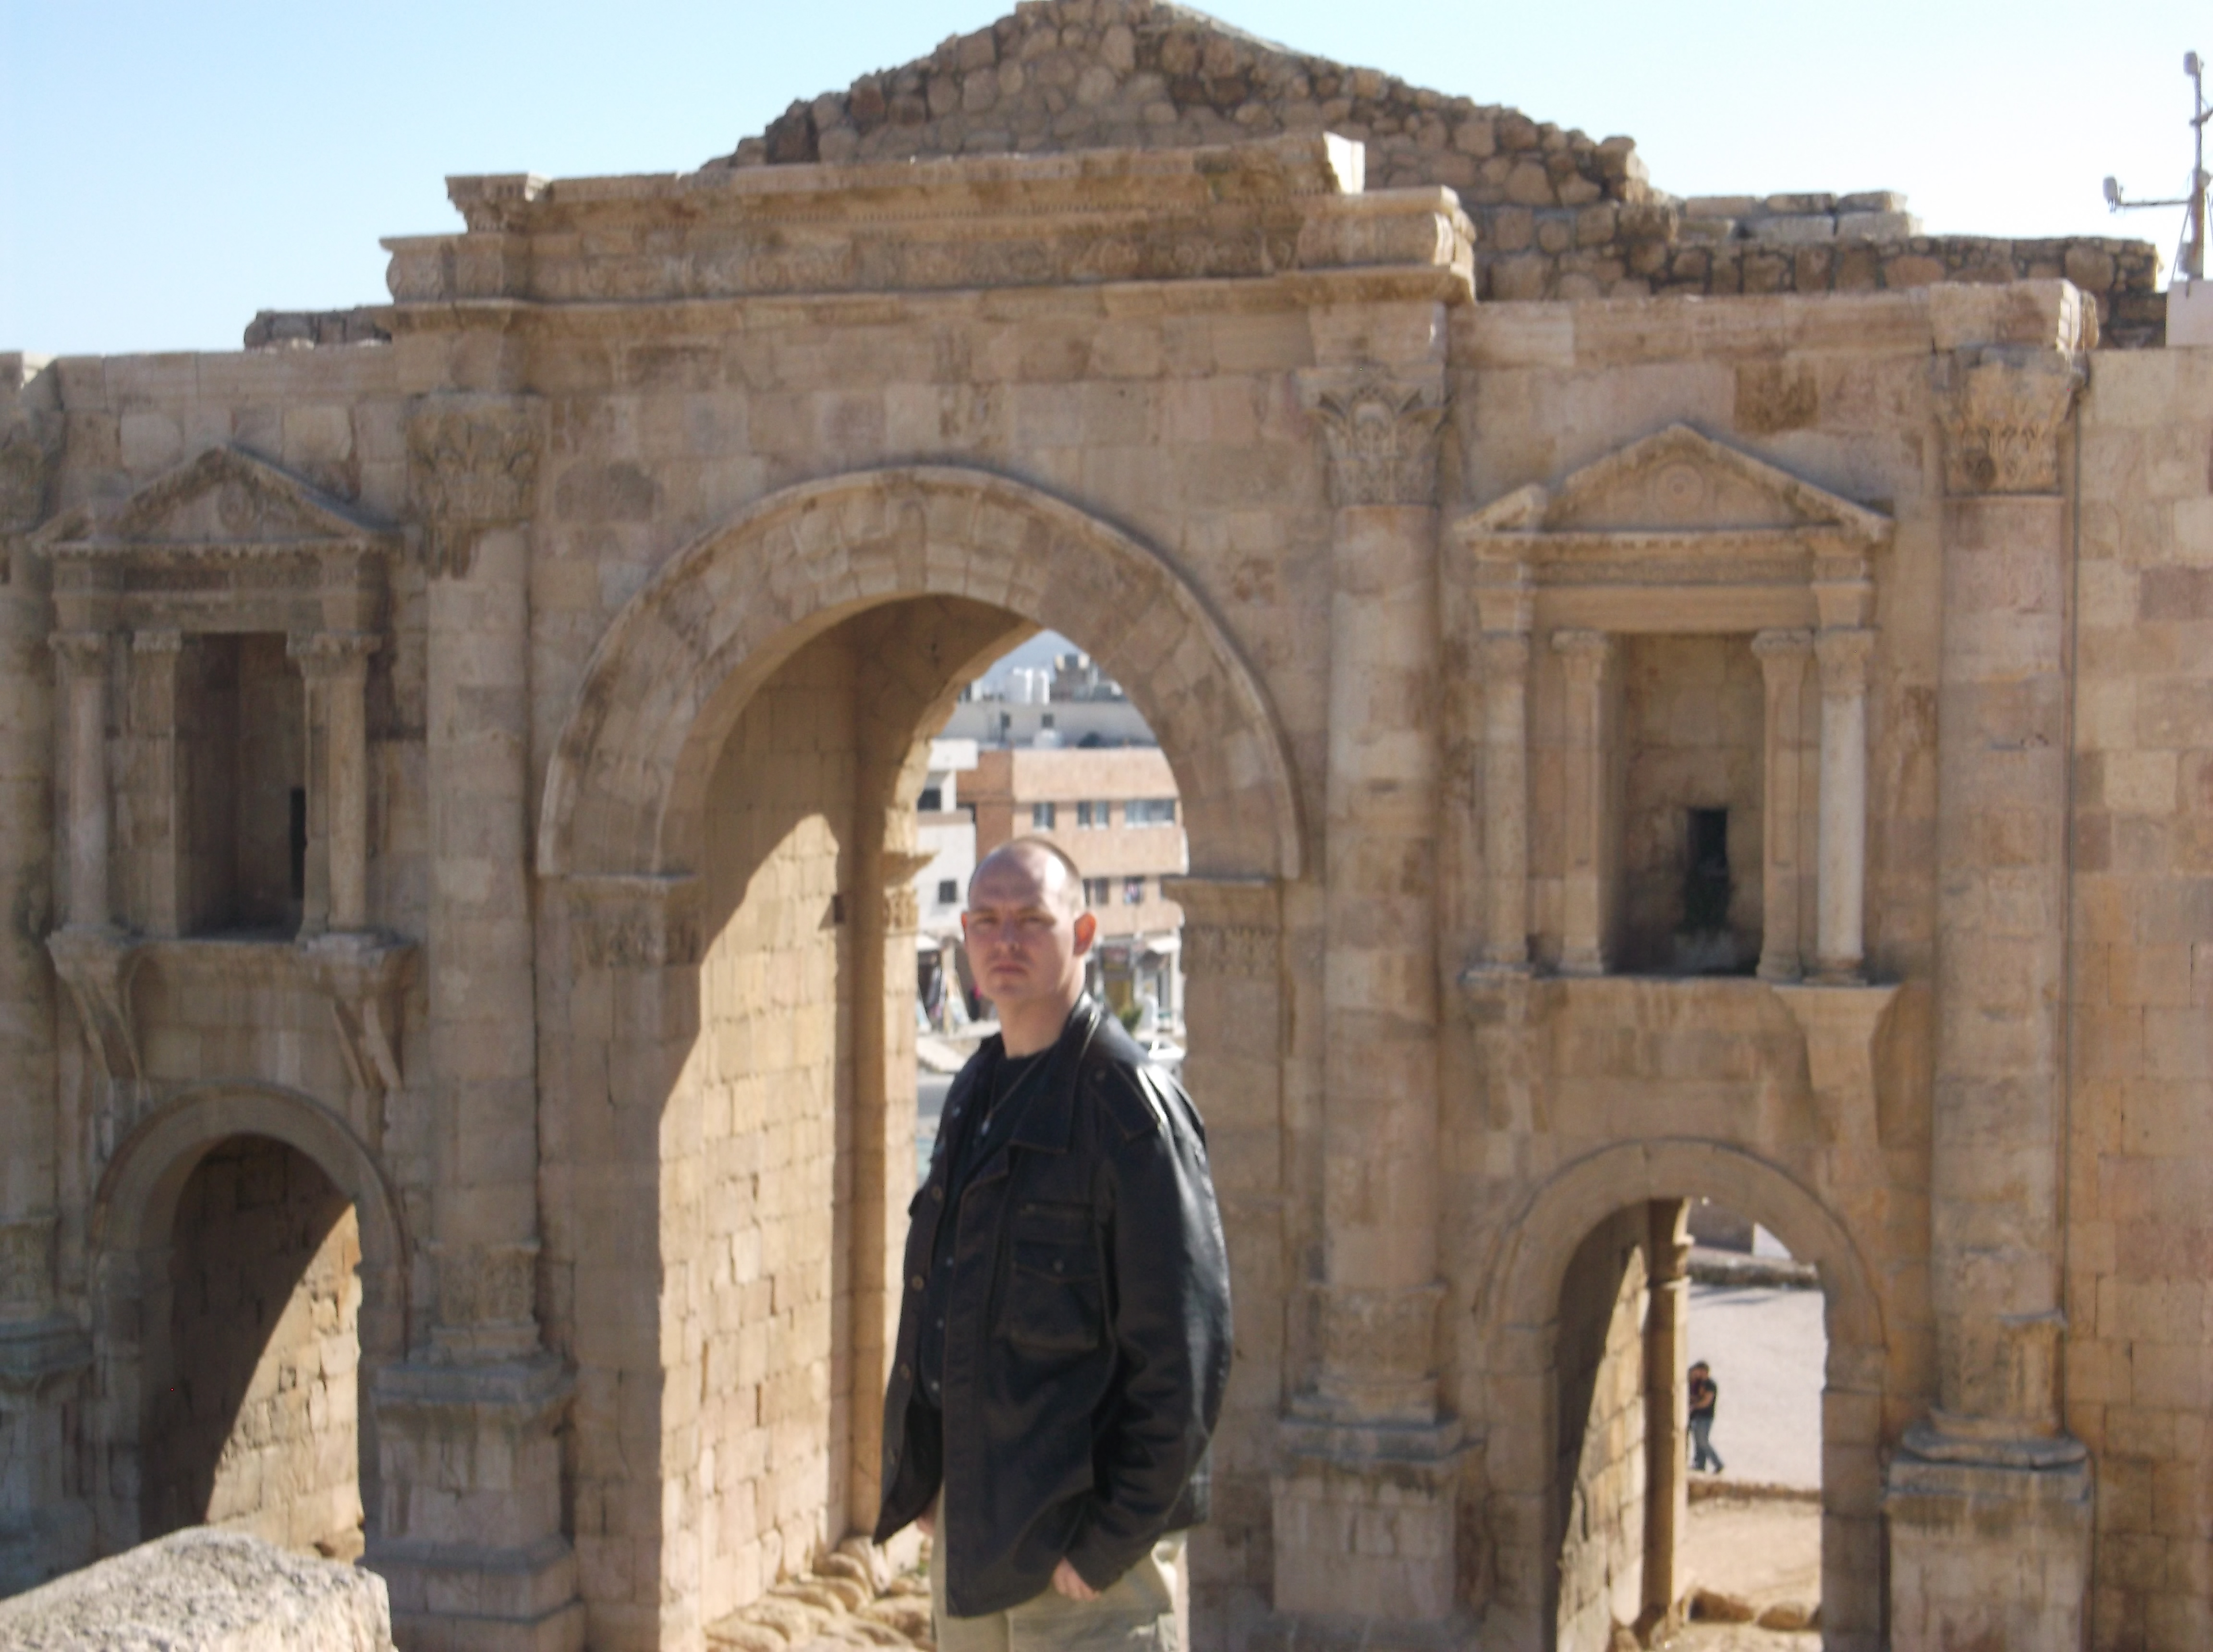 A view of the Triumphant Archway in Jerash, Jordan